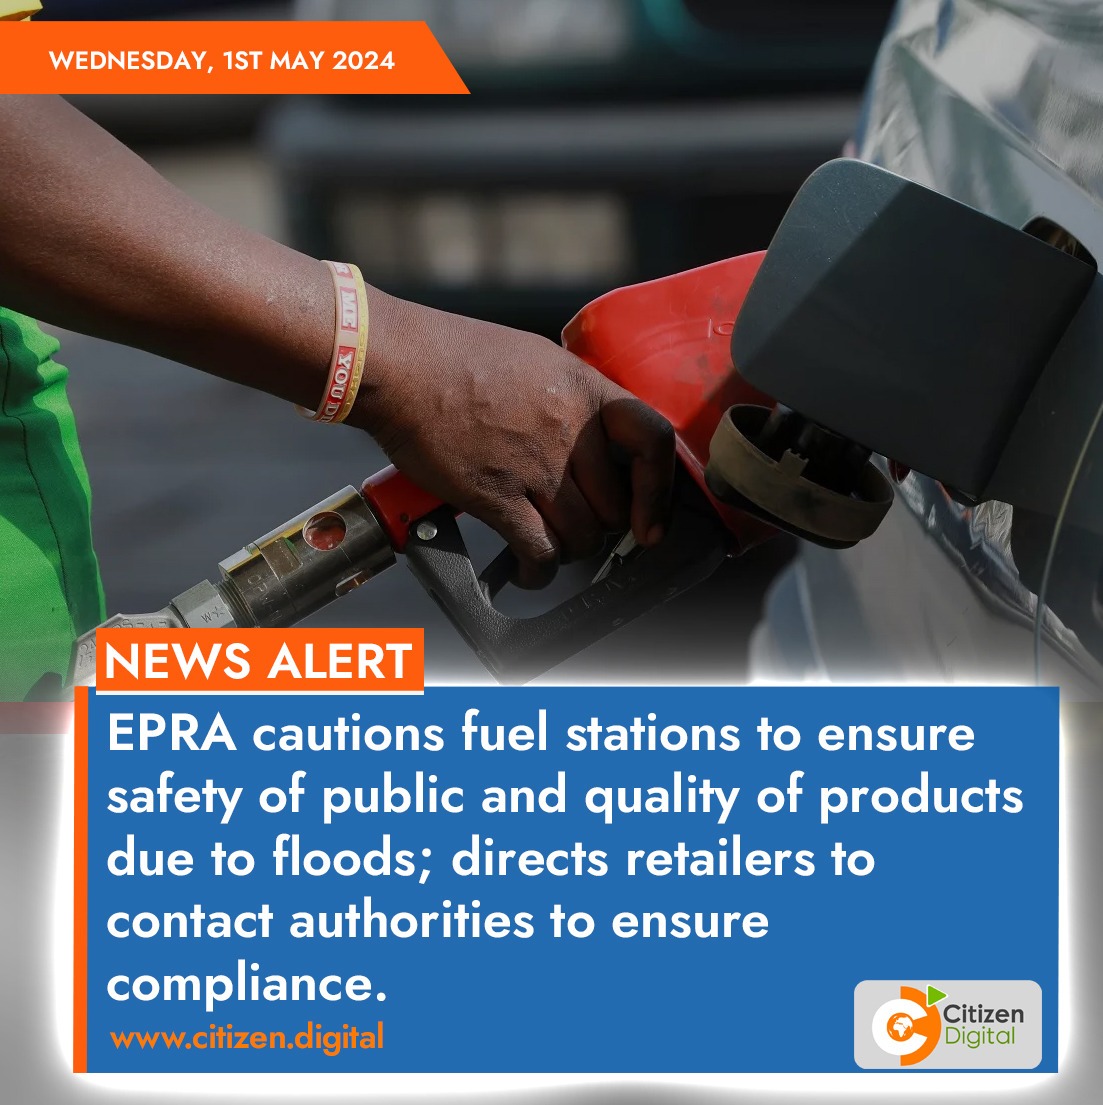 EPRA cautions fuel stations to ensure safety of public and quality of products due to floods; directs retailers to contact authorities to ensure compliance